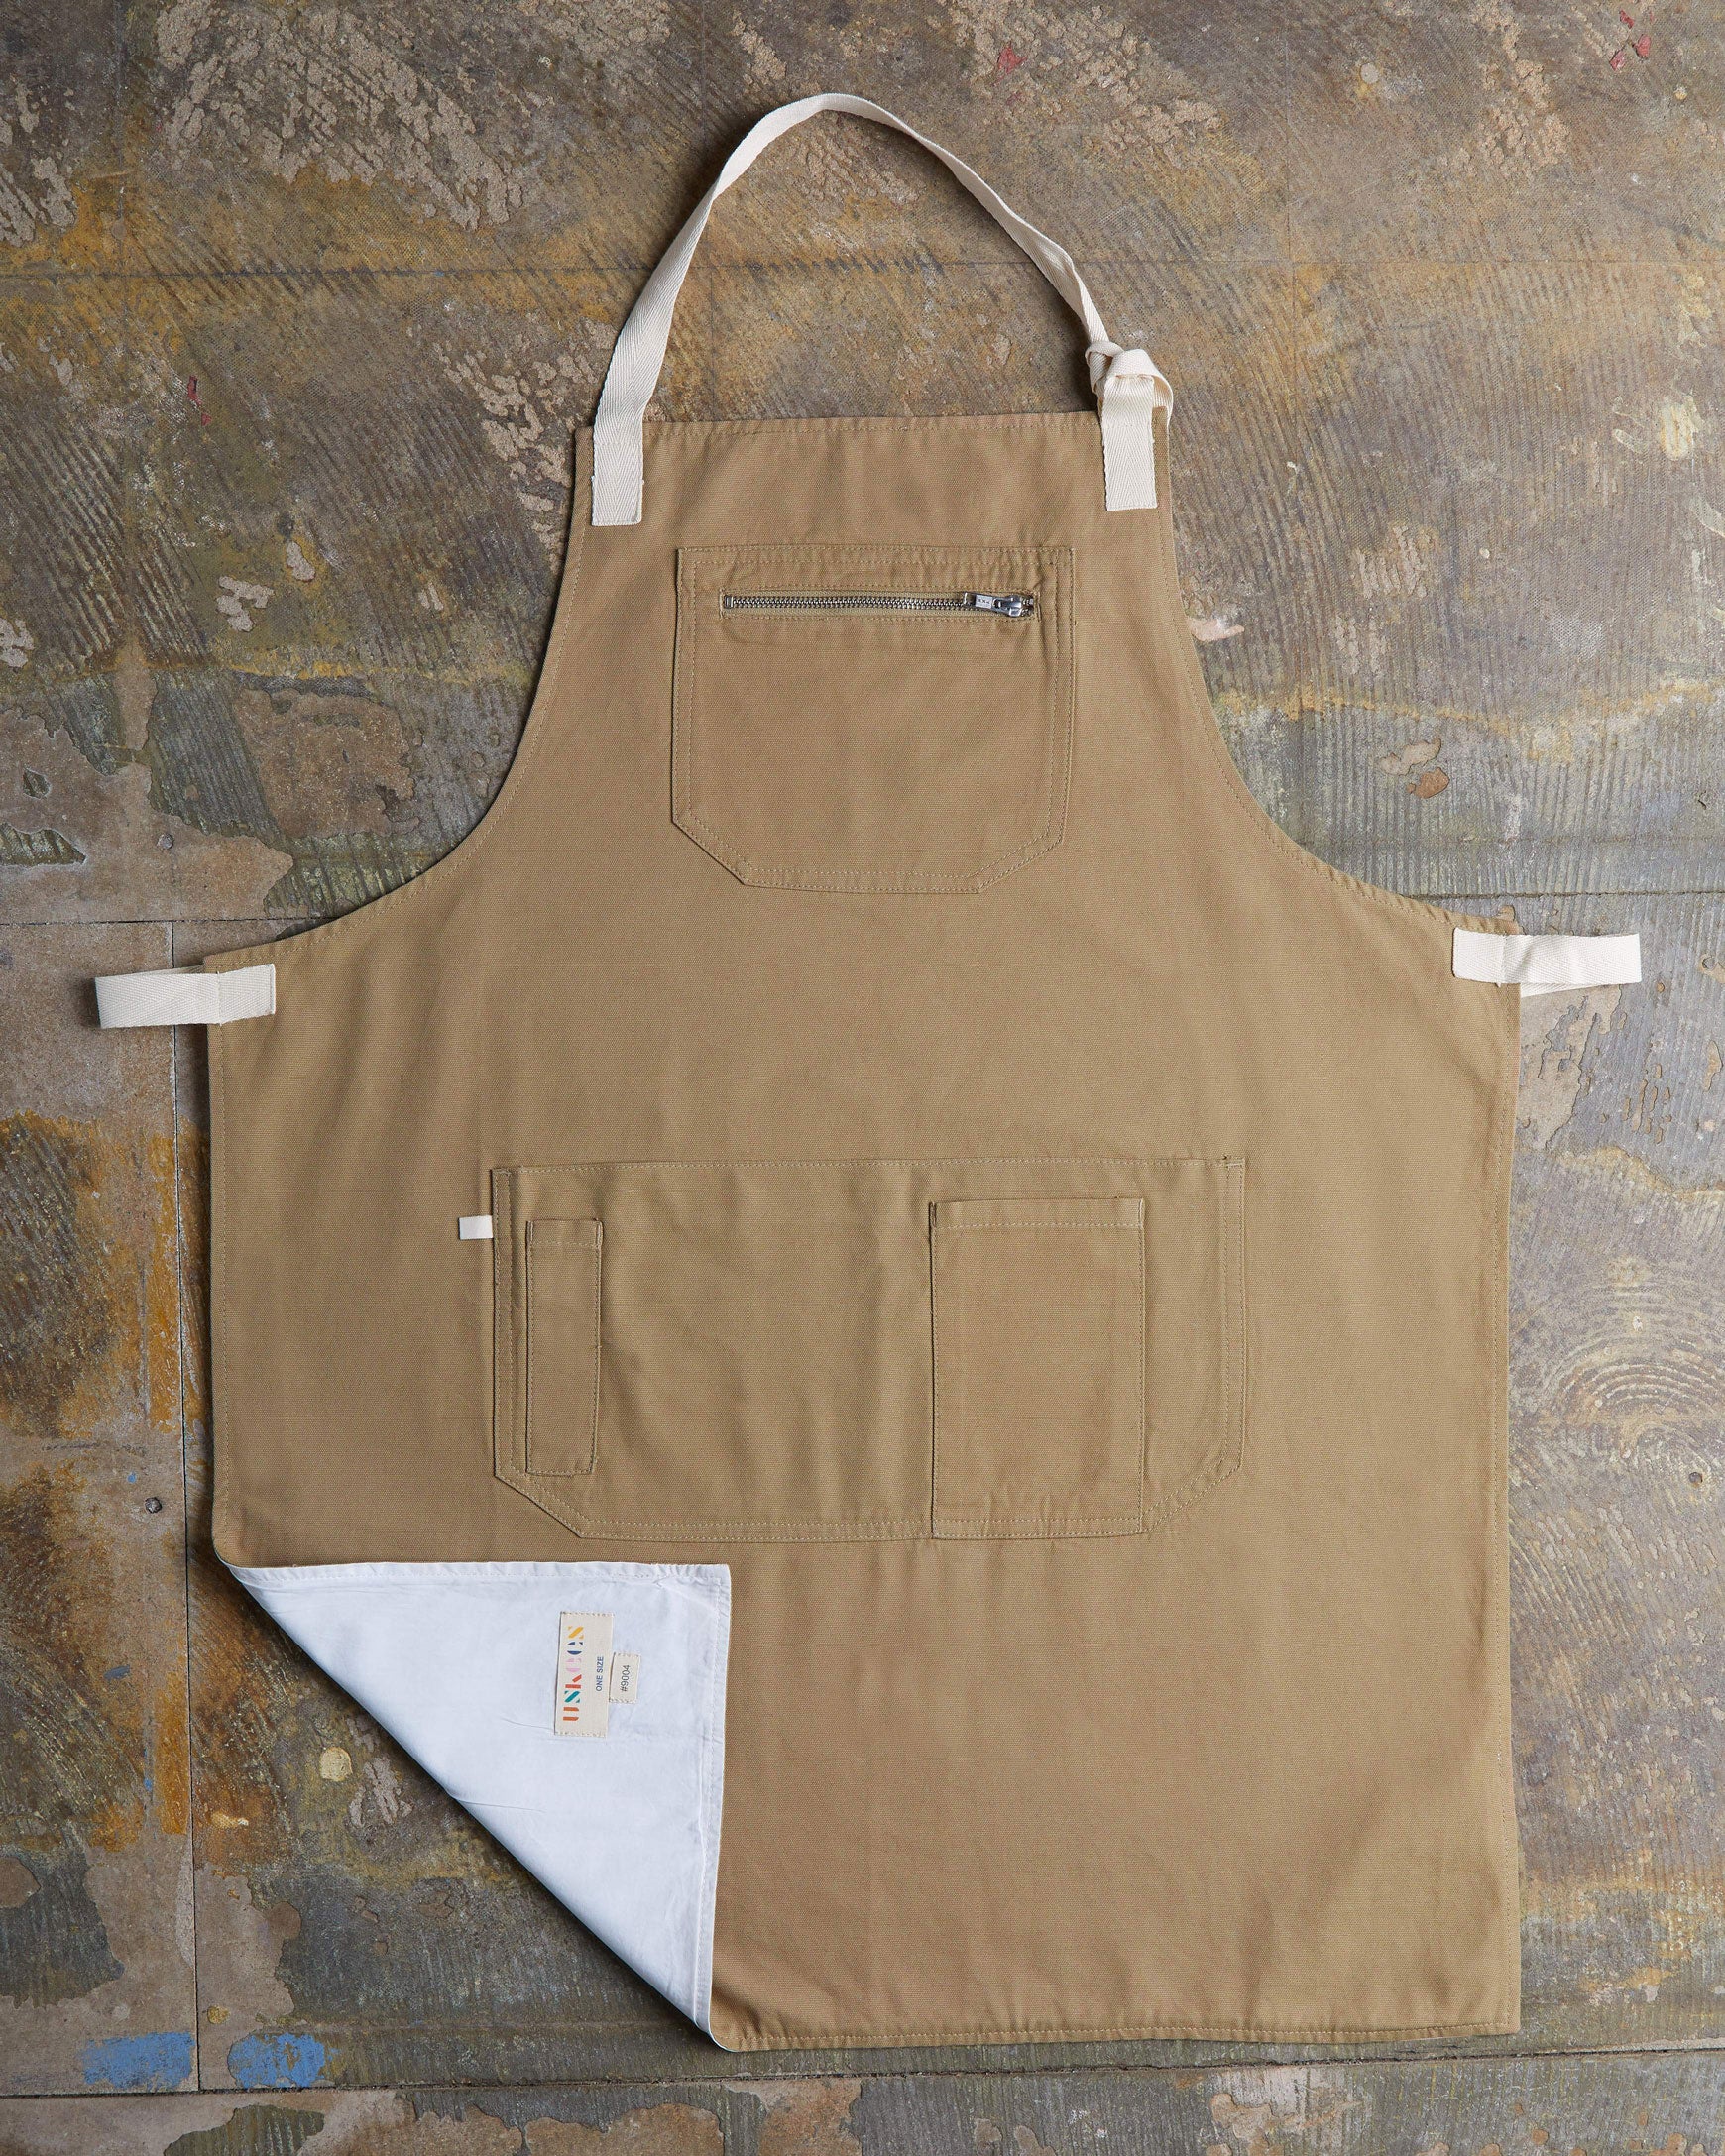 Full, flat view of khaki #9004 carpenter apron by Uskees. Showing pen, phone and pouch pockets with left corner folded up to reveal lining and 'Uskees' label.